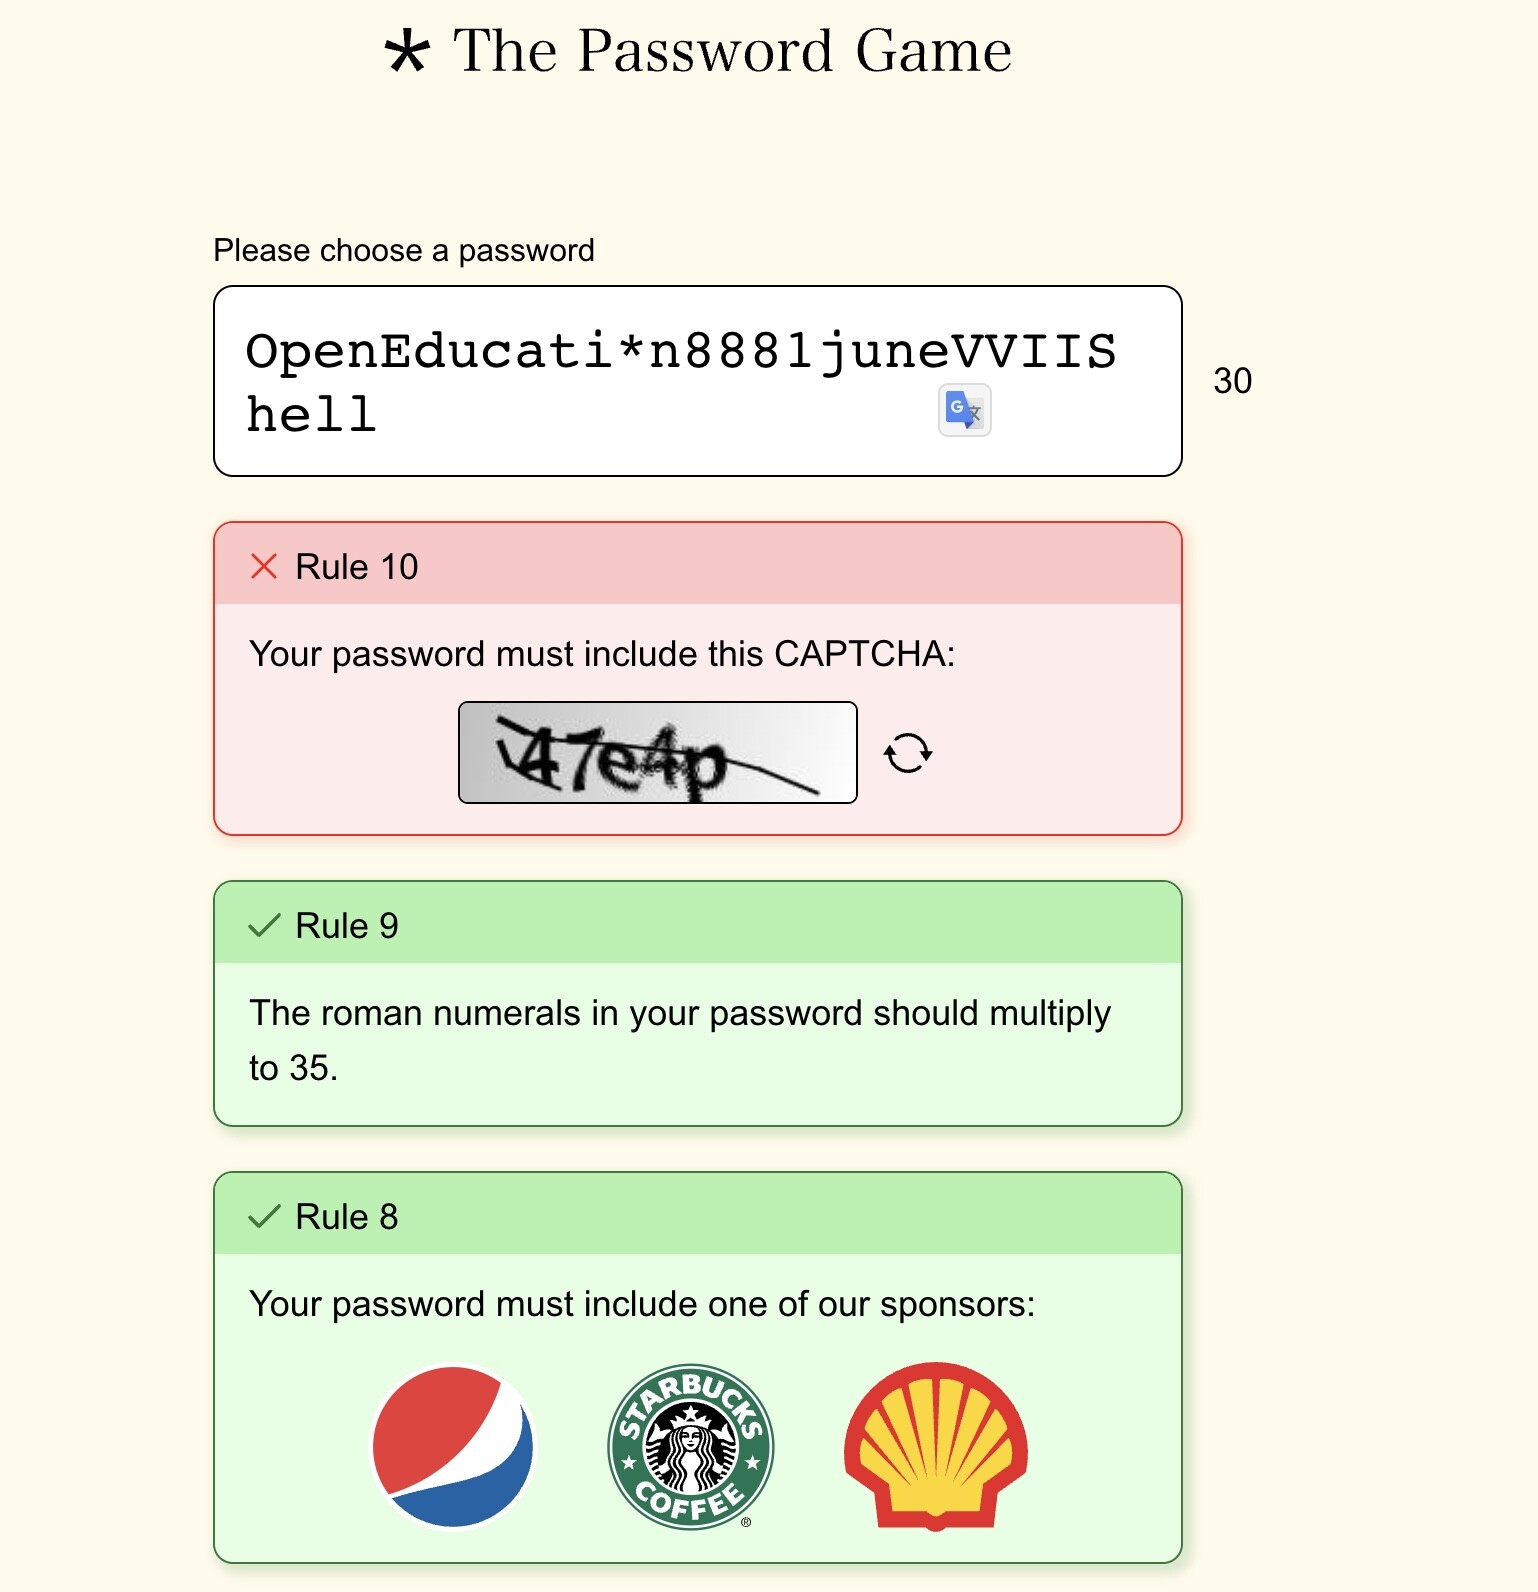 Trying the Password Game! 